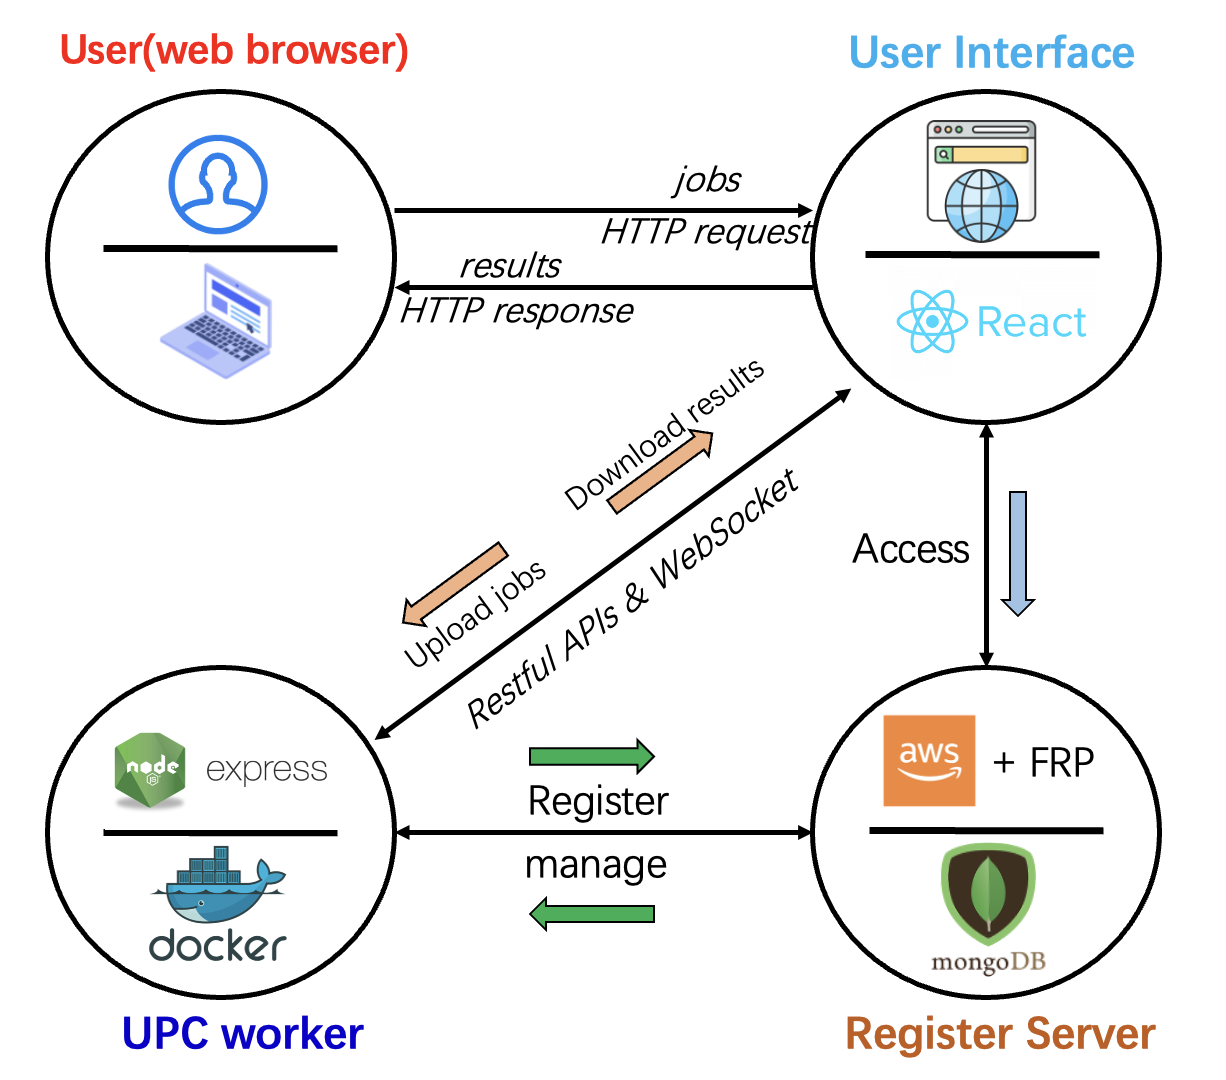 Workflow of the UPC system